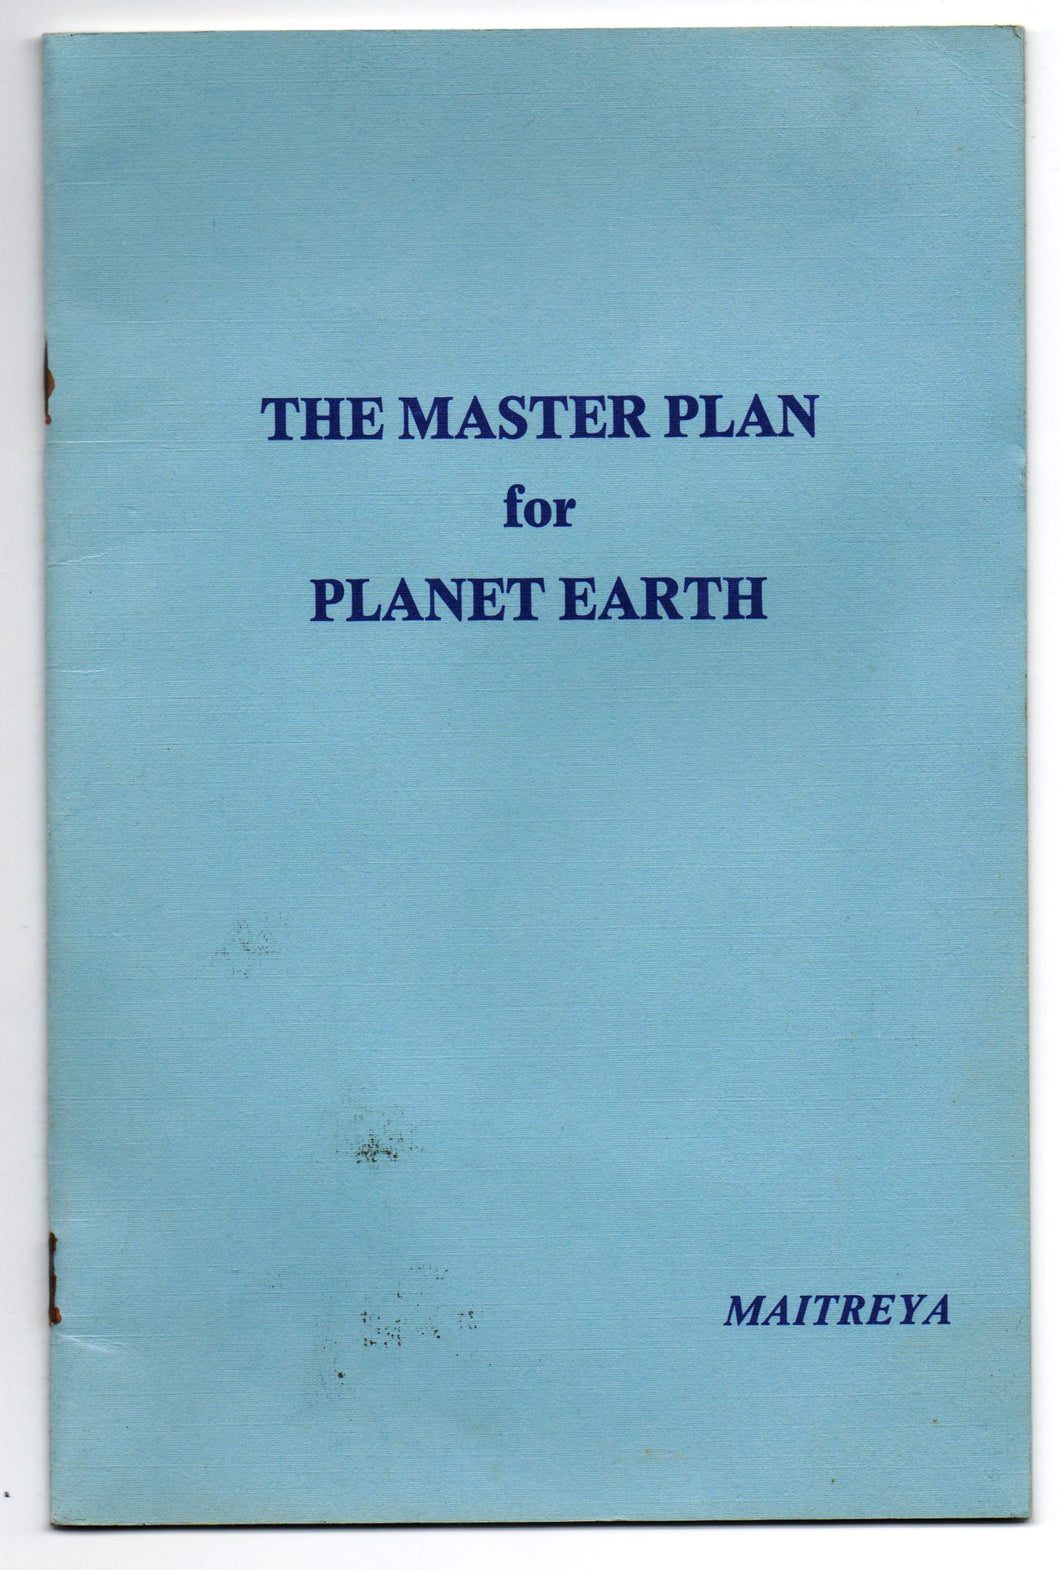 The Master Plan for Planet Earth